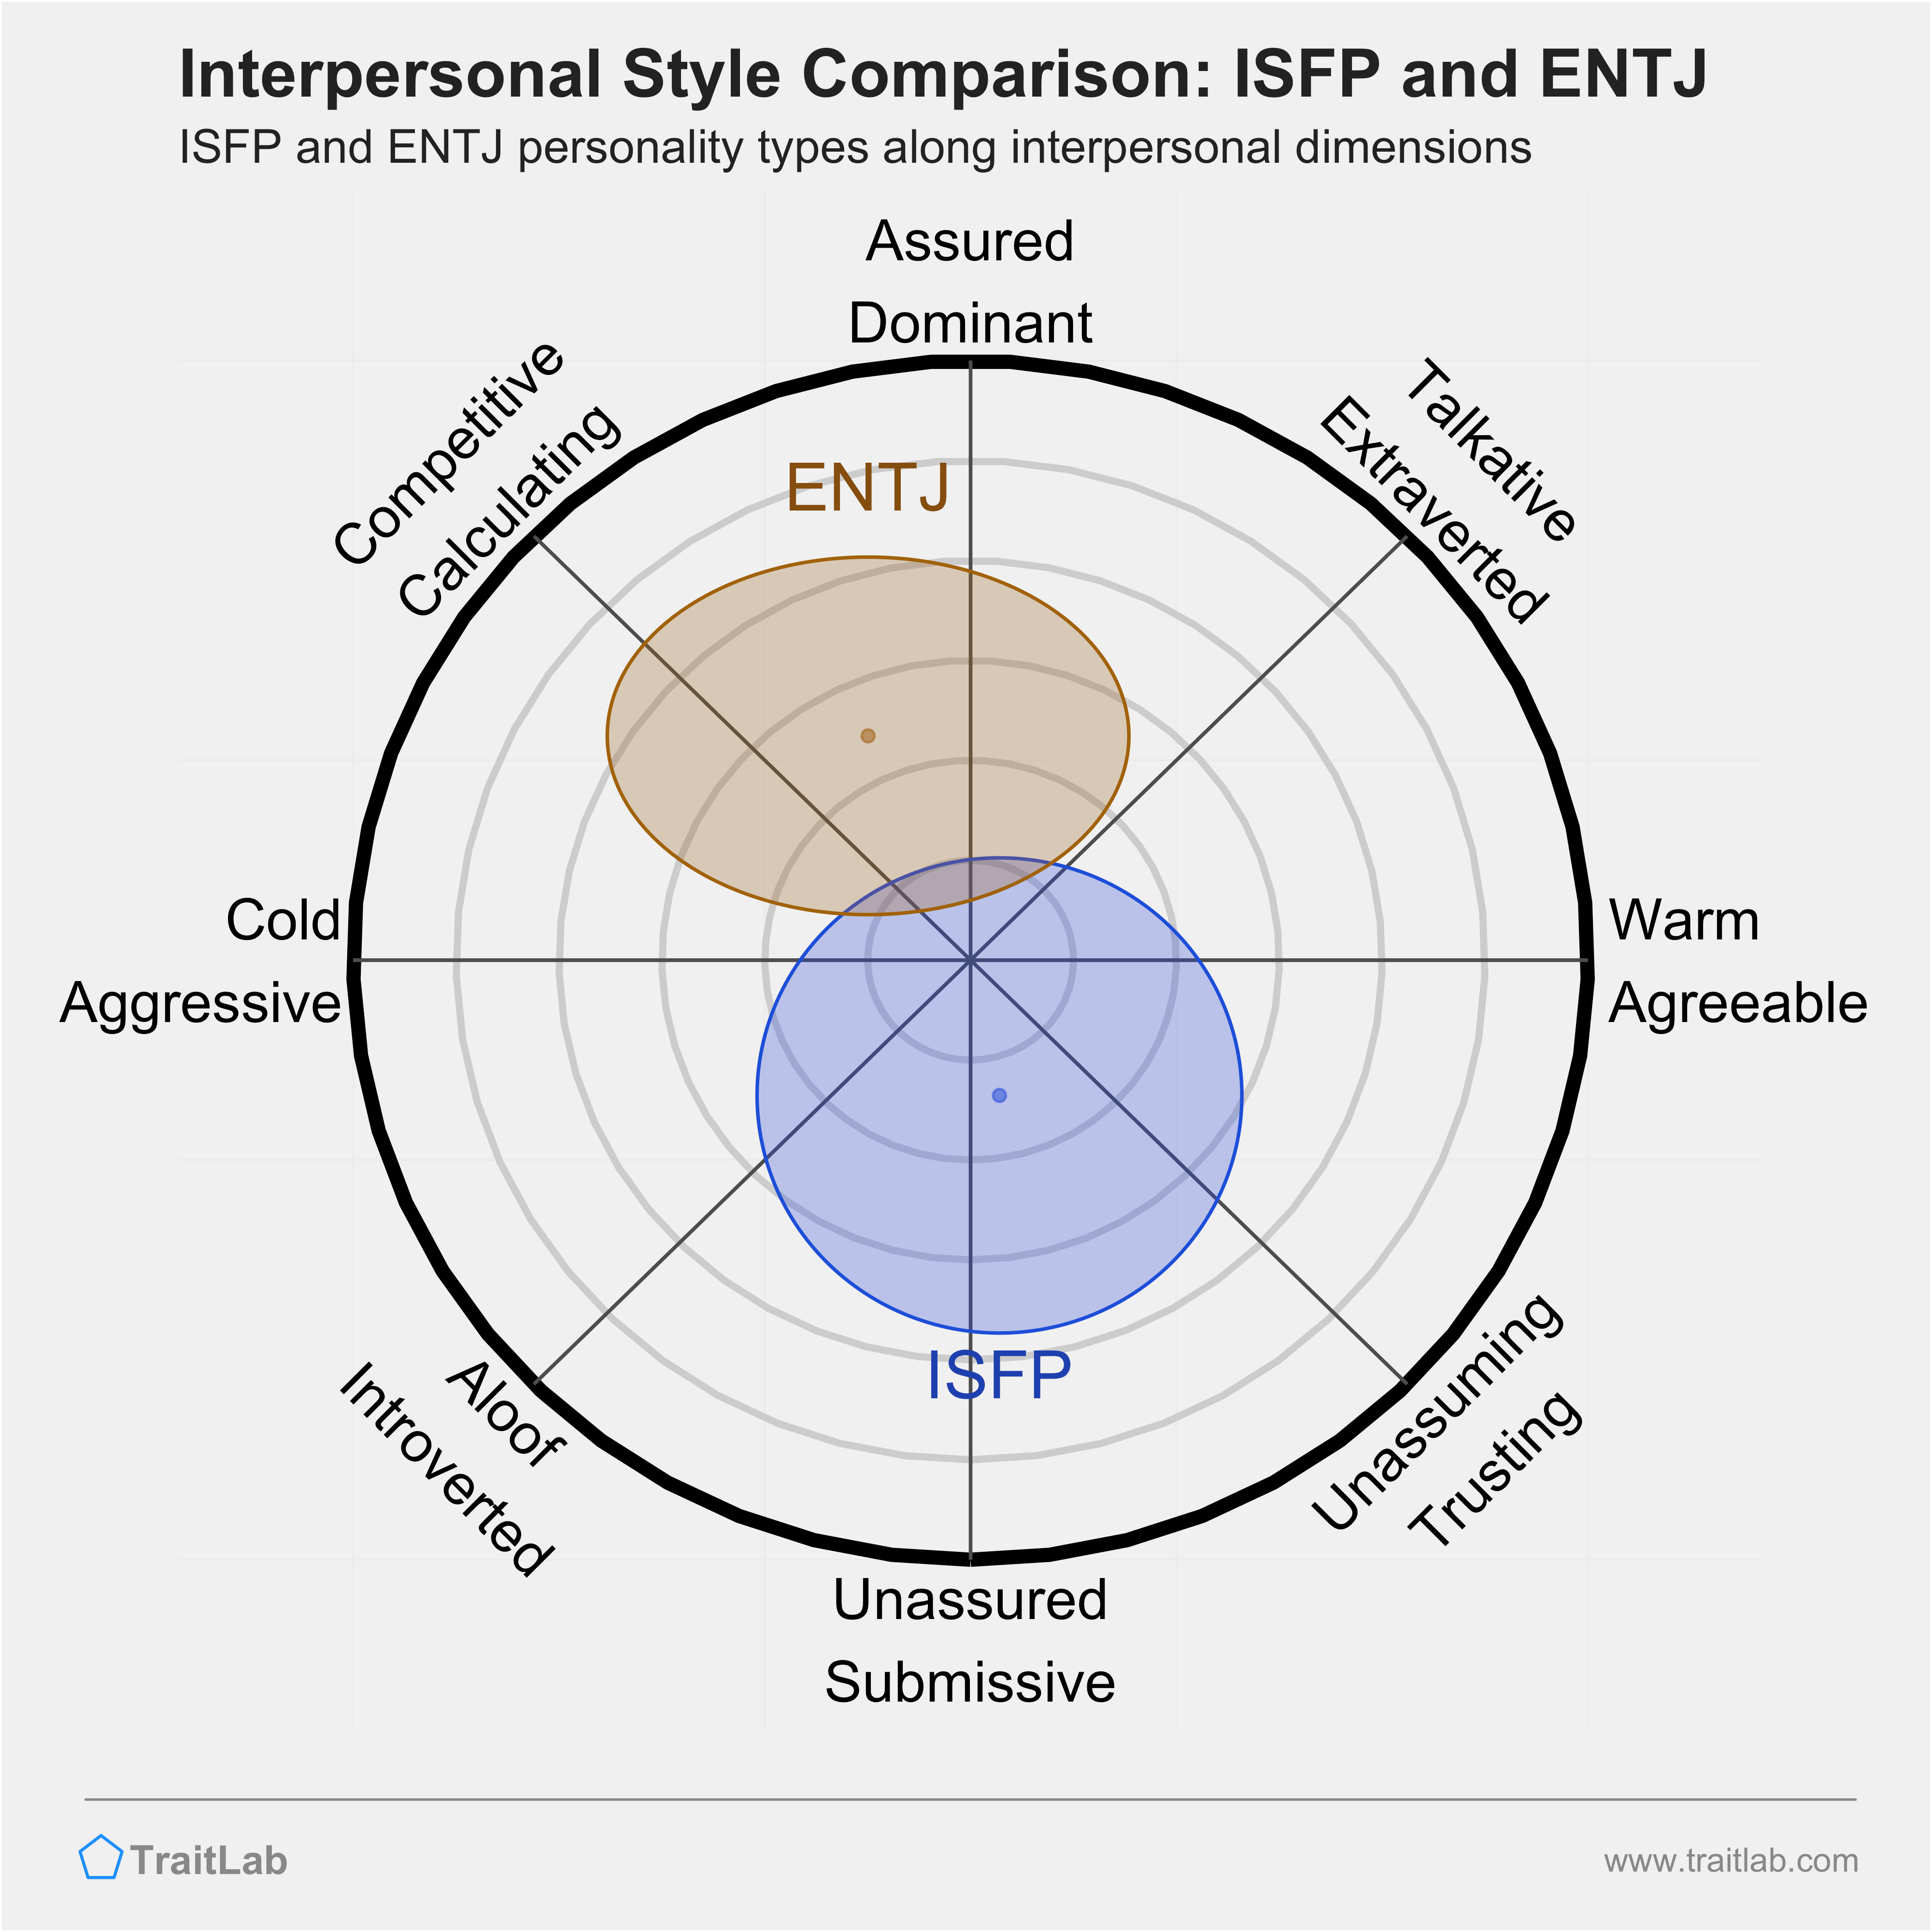 ISFP and ENTJ comparison across interpersonal dimensions